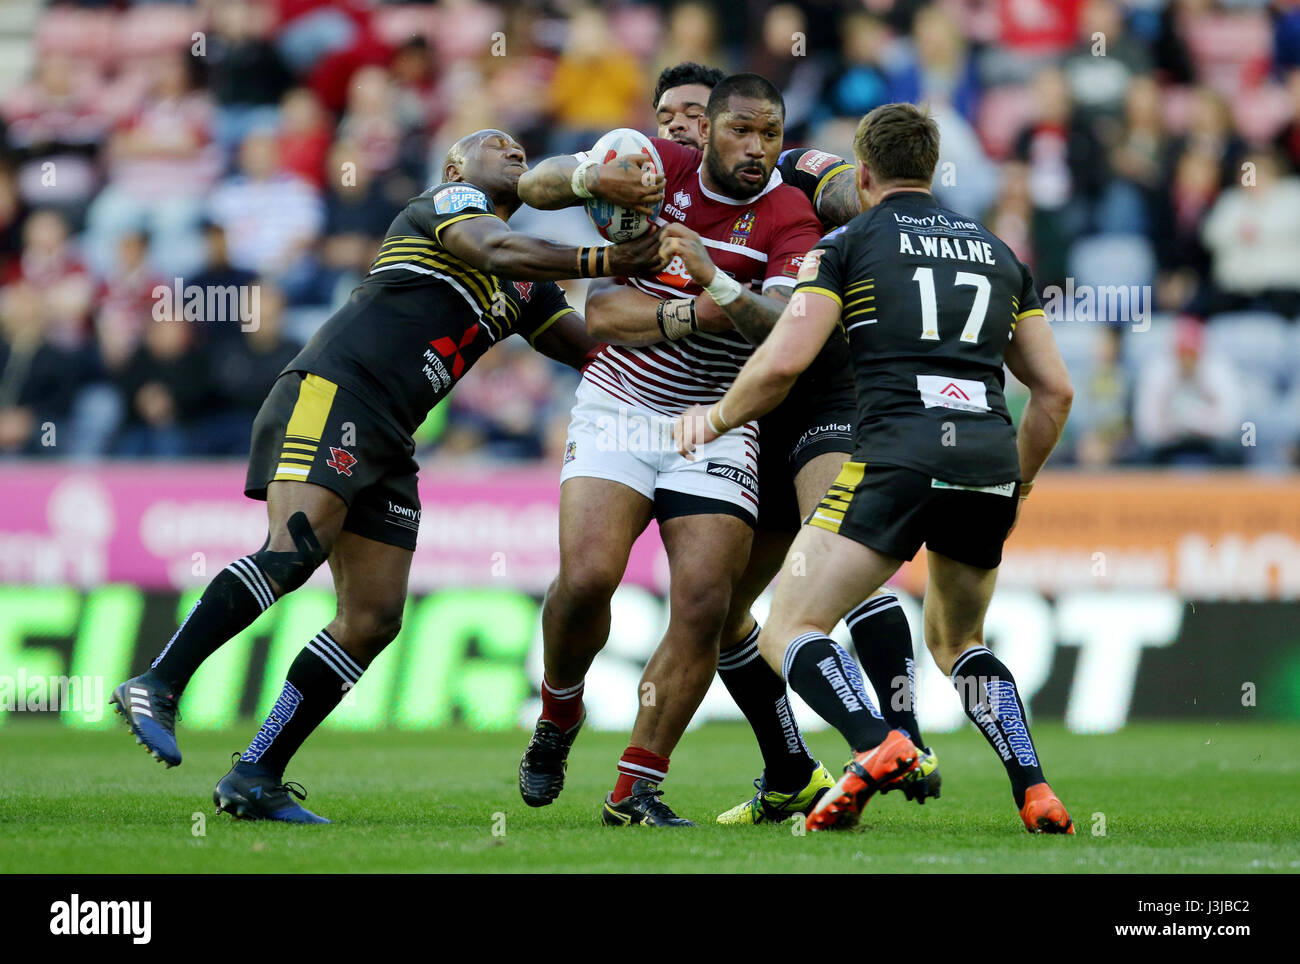 Wigan Warriors' Frank-Paul Nuuausala is tackled by Salford's Robert Lui, Adam Walne and Ben Murdoch-Masila during the Betfred Super League match at The DW Stadium, Wigan. Stock Photo